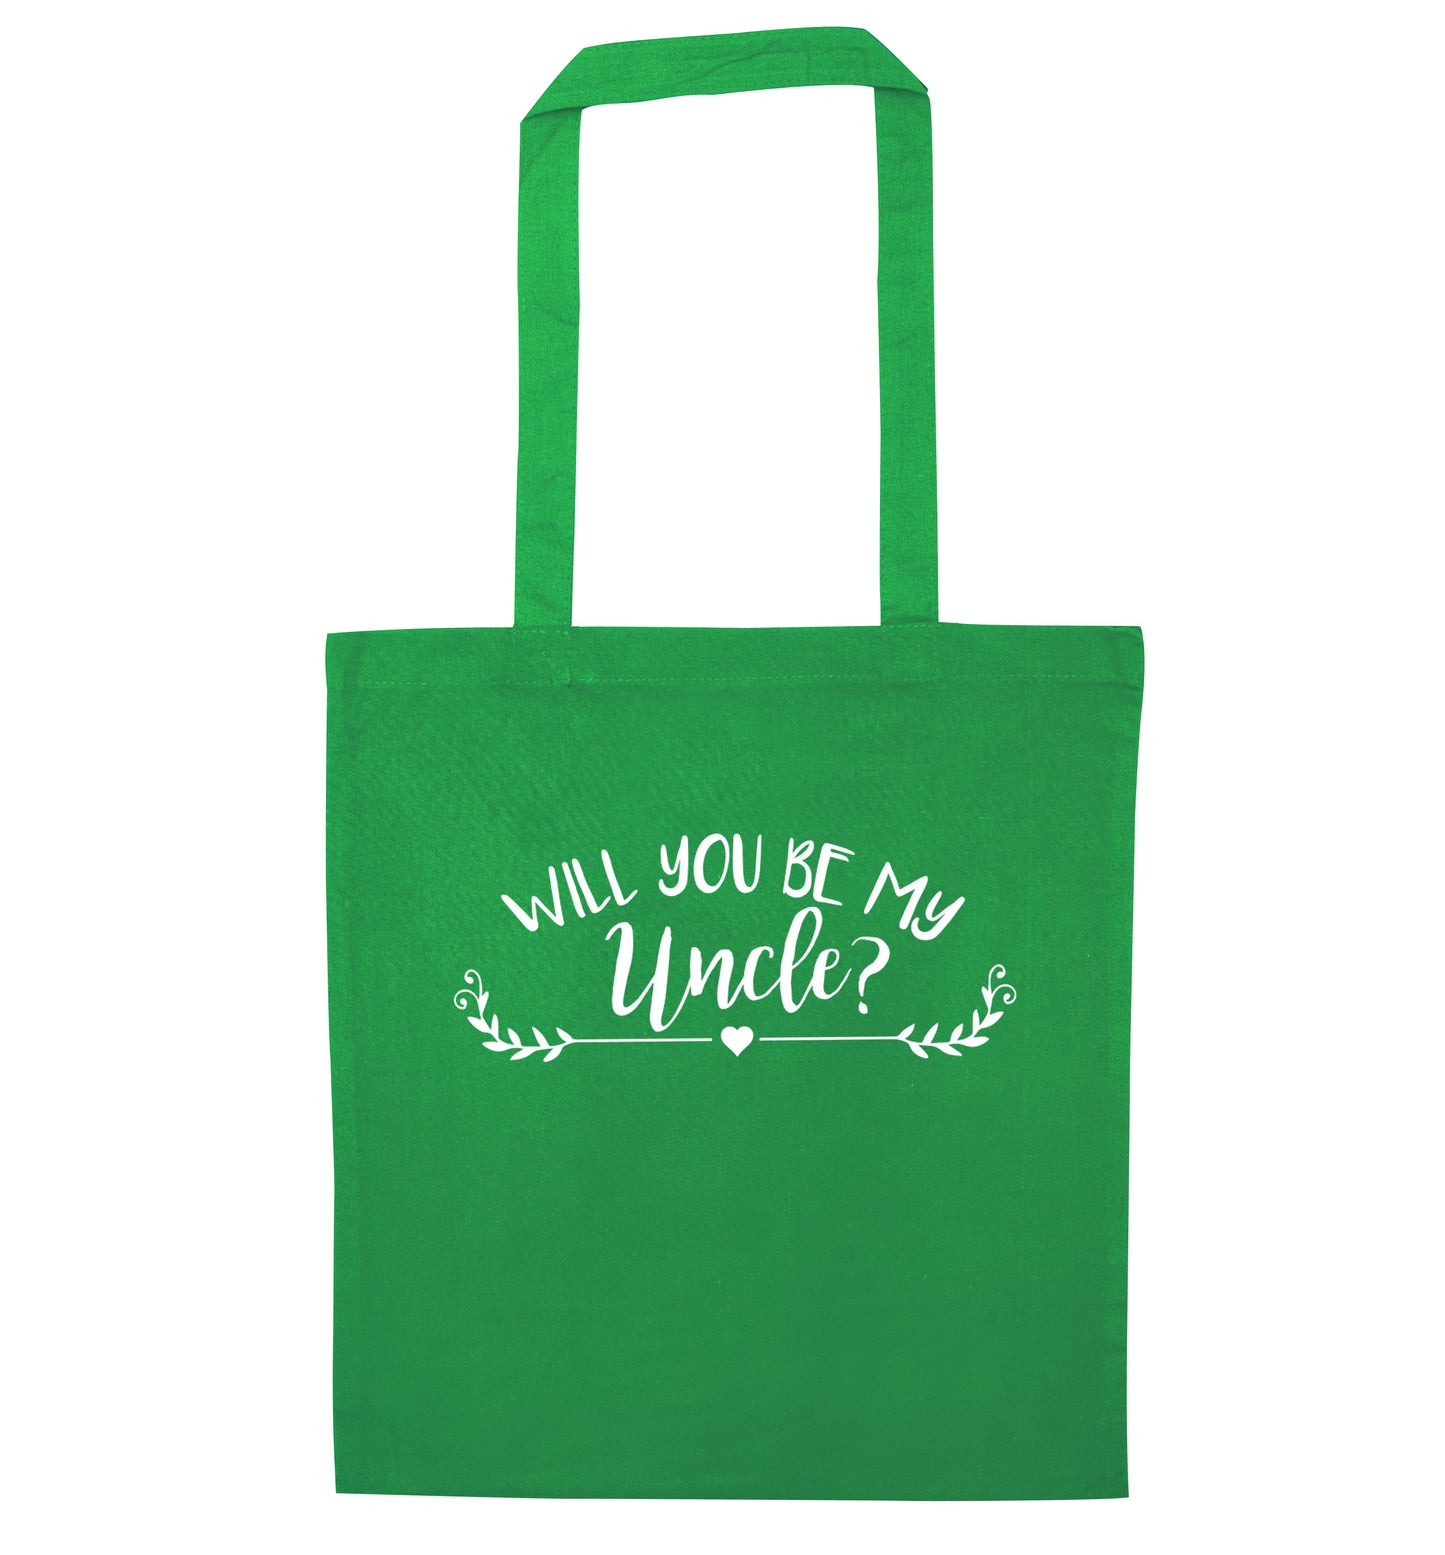 Will you be my uncle? green tote bag